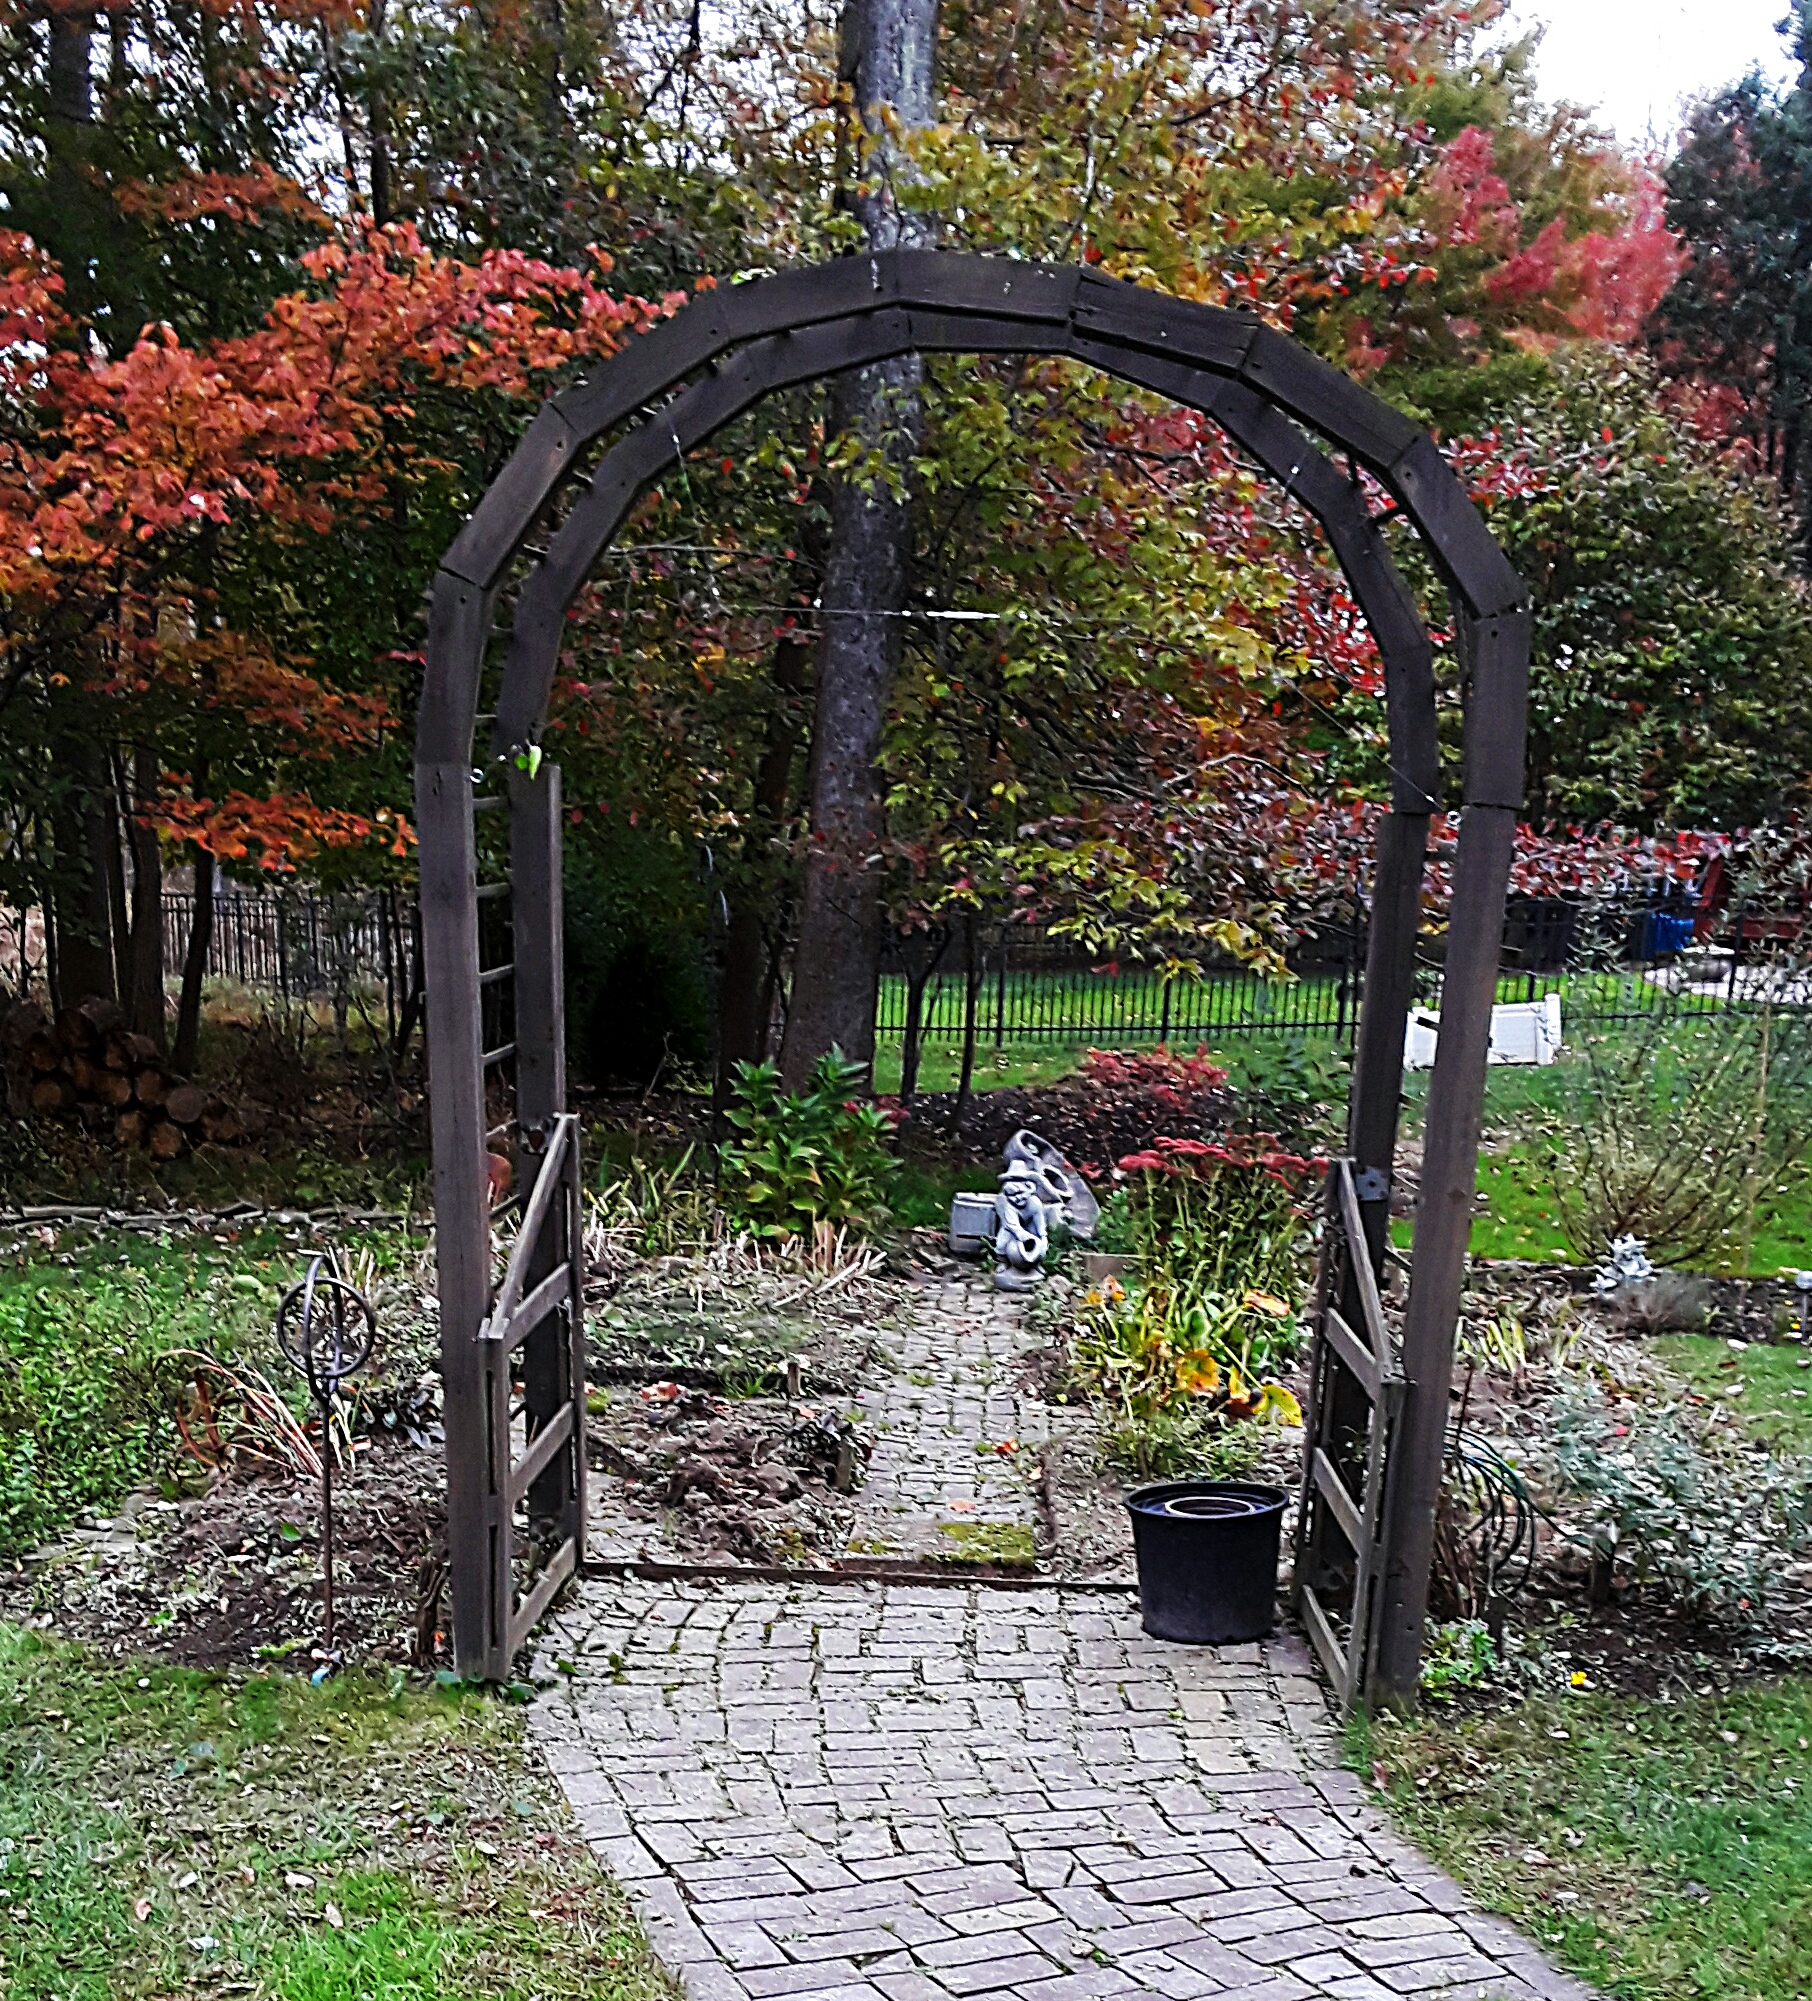 The arch remains, but the rest of the garden fence has been taken down.